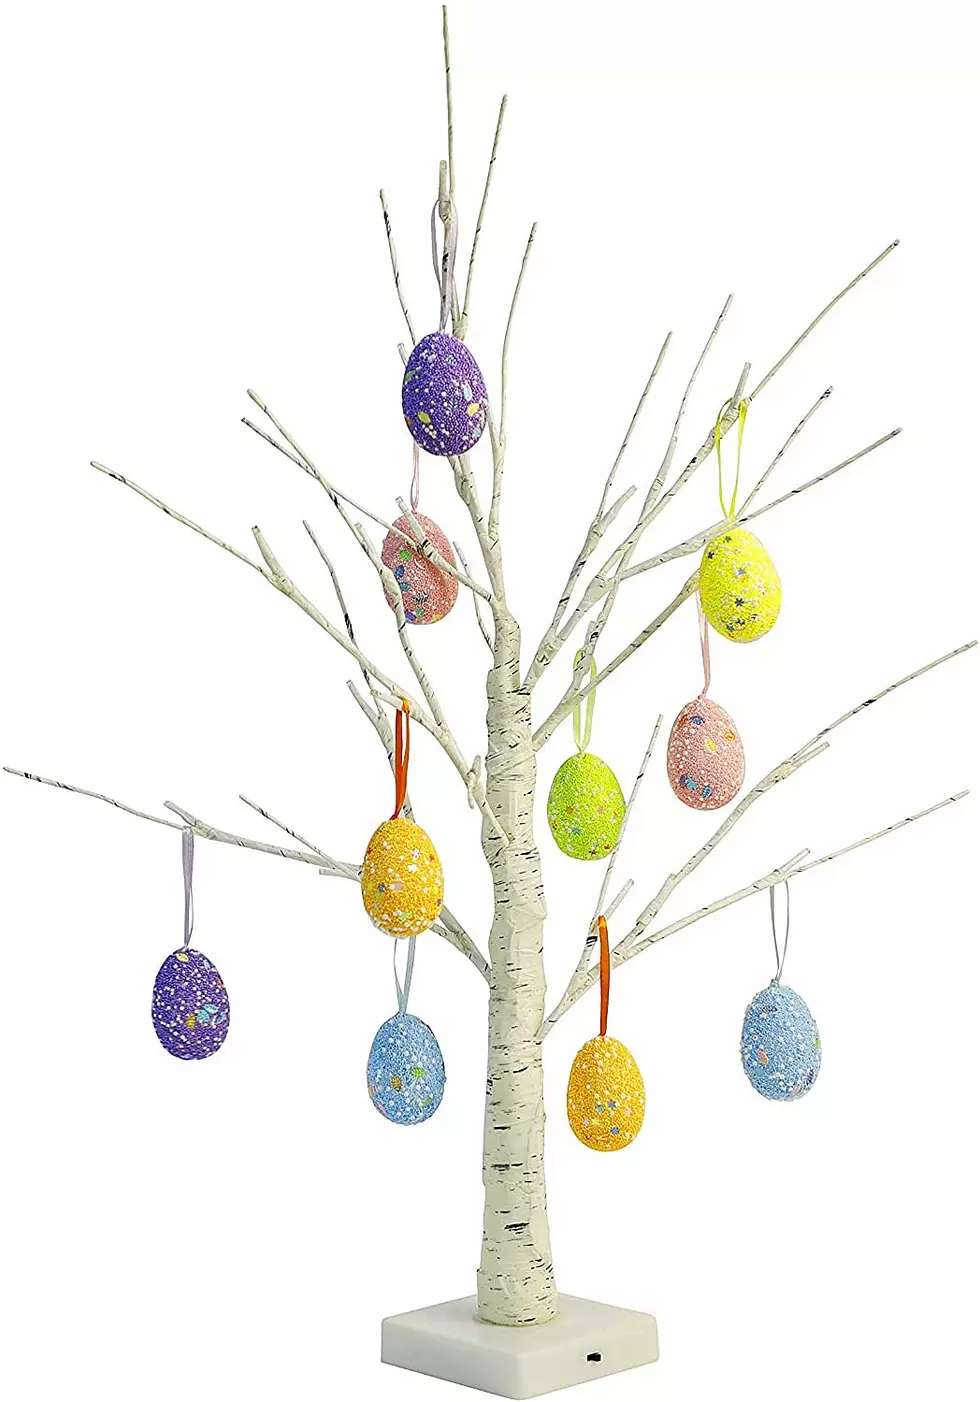 Easter Tree Interest Up 900% &#8211; Here&#8217;s How to Get 1 in Rochester (or How to Make Them)